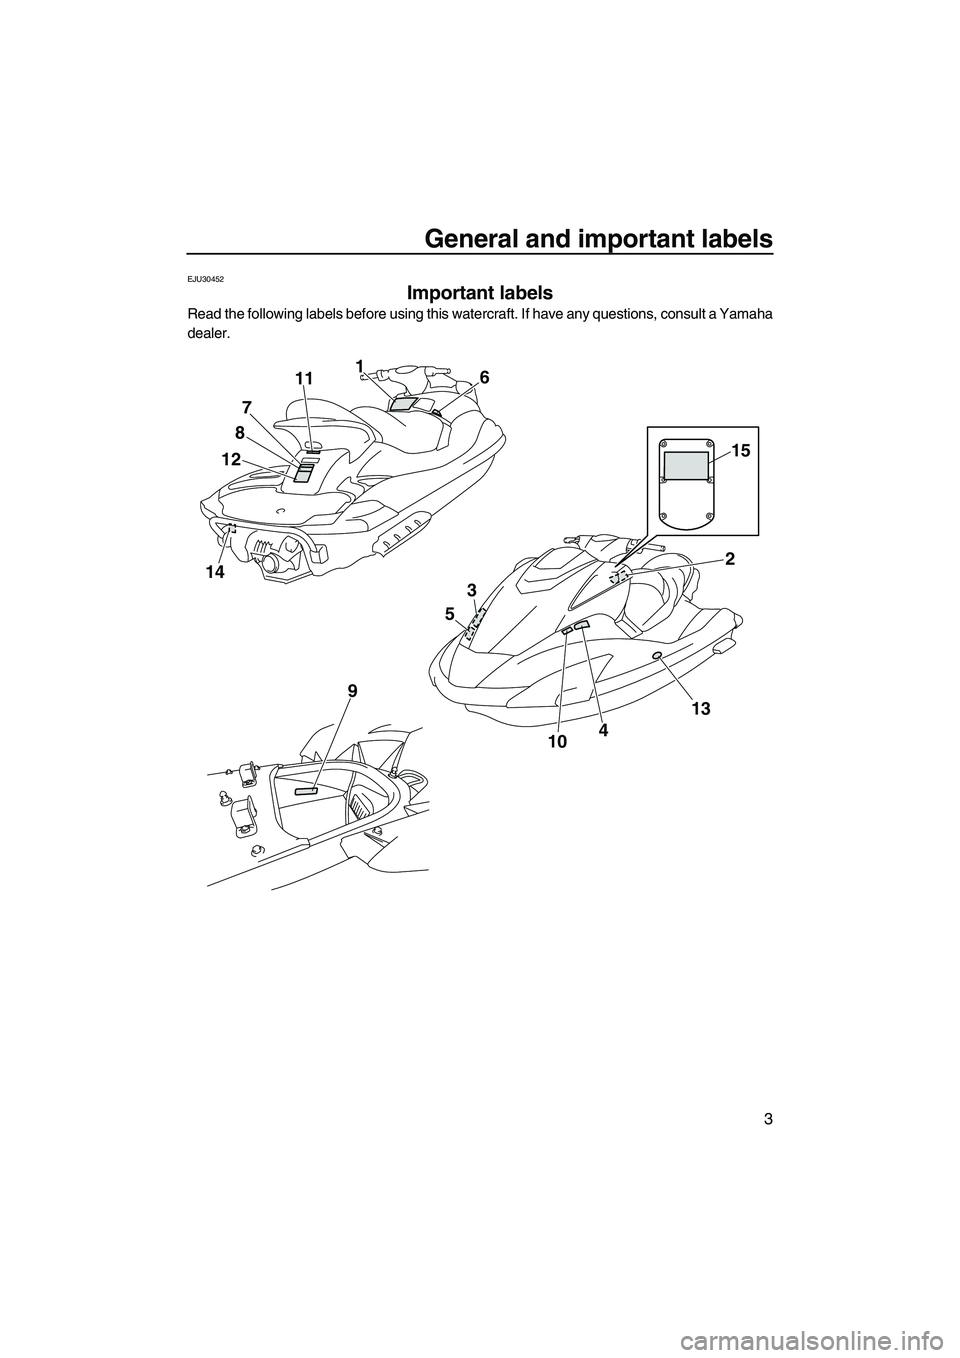 YAMAHA SVHO 2011  Owners Manual General and important labels
3
EJU30452
Important labels 
Read the following labels before using this watercraft. If have any questions, consult a Yamaha
dealer.
14
1287111
6
4
9
132
3
5
10
15
UF1W73E